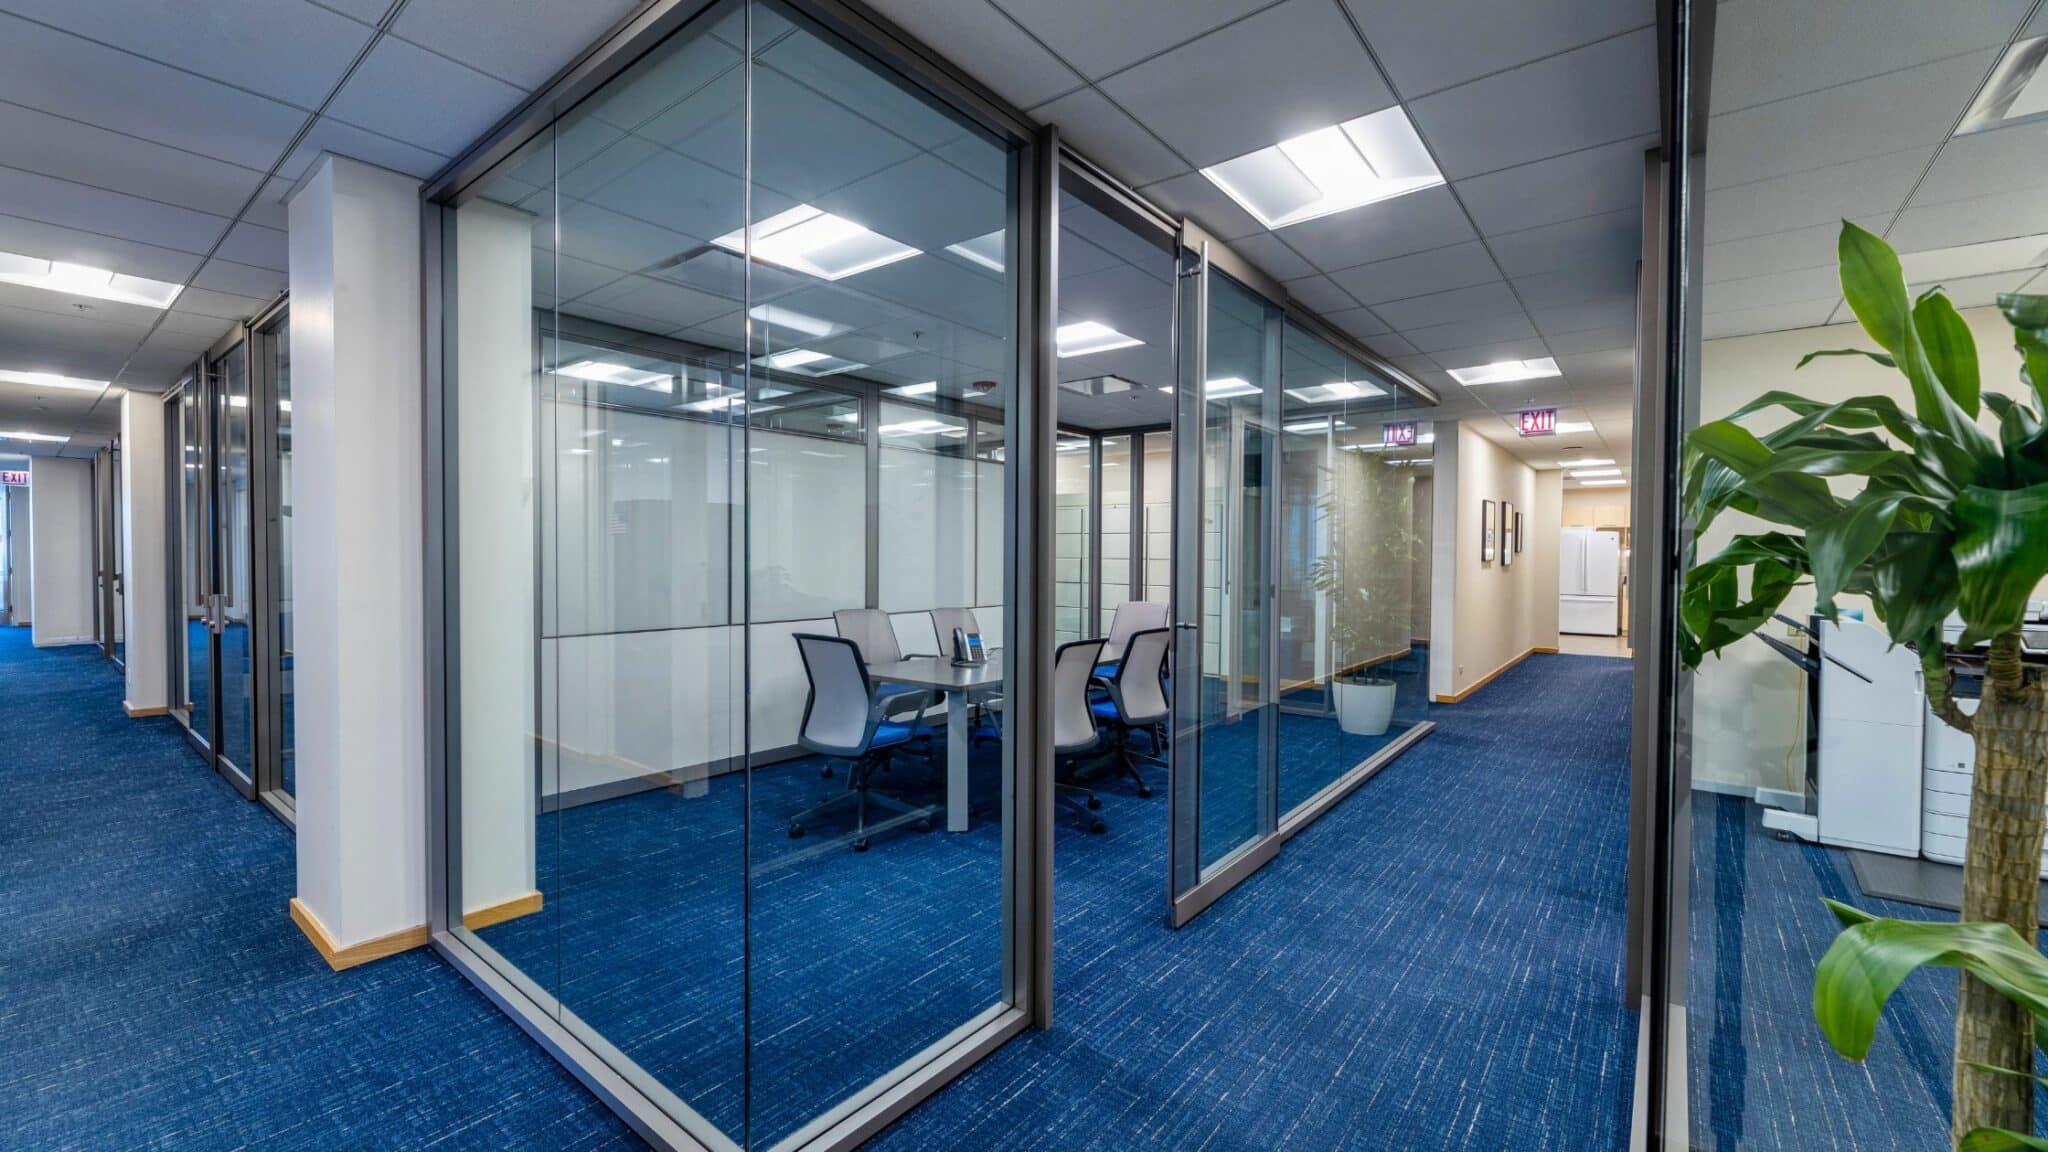 CJ & Associates with Teknion transformed this office space.